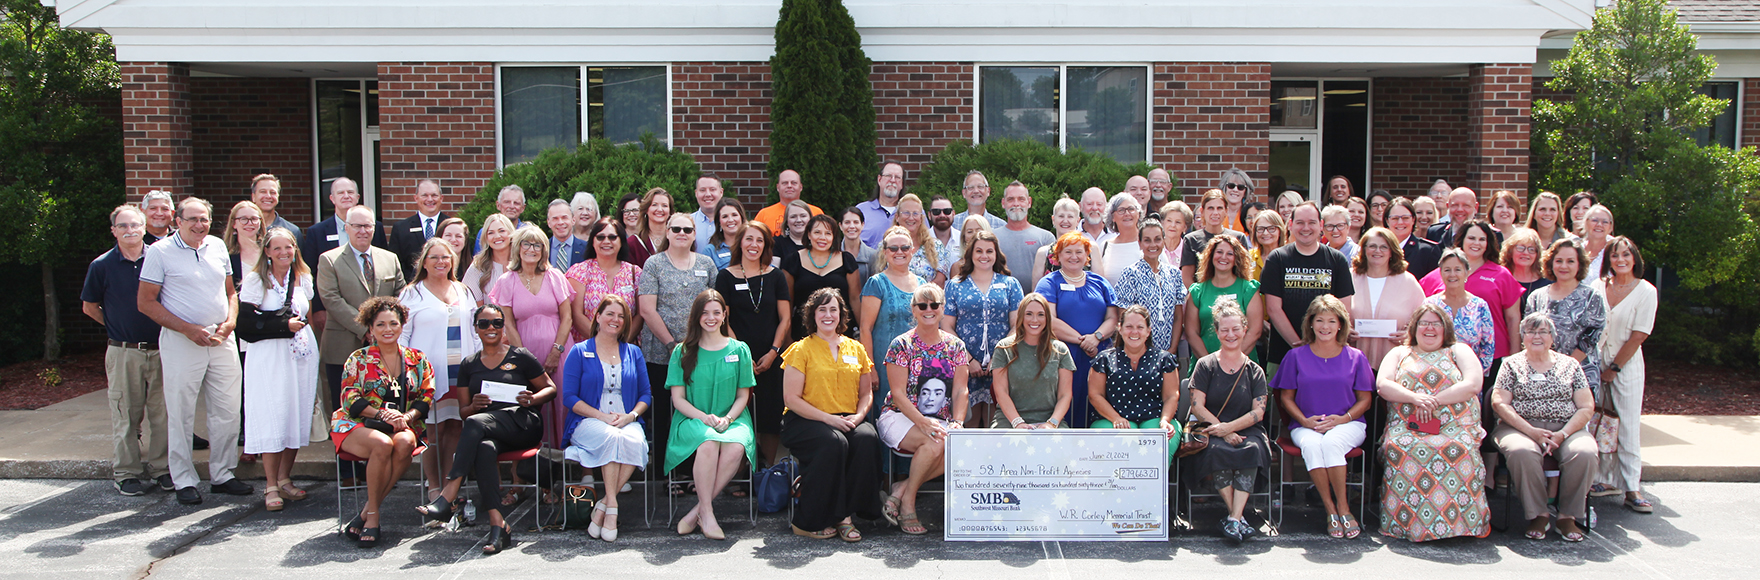 Southwest Missouri Bank Announces 5th Year of Corley Grant Recipients